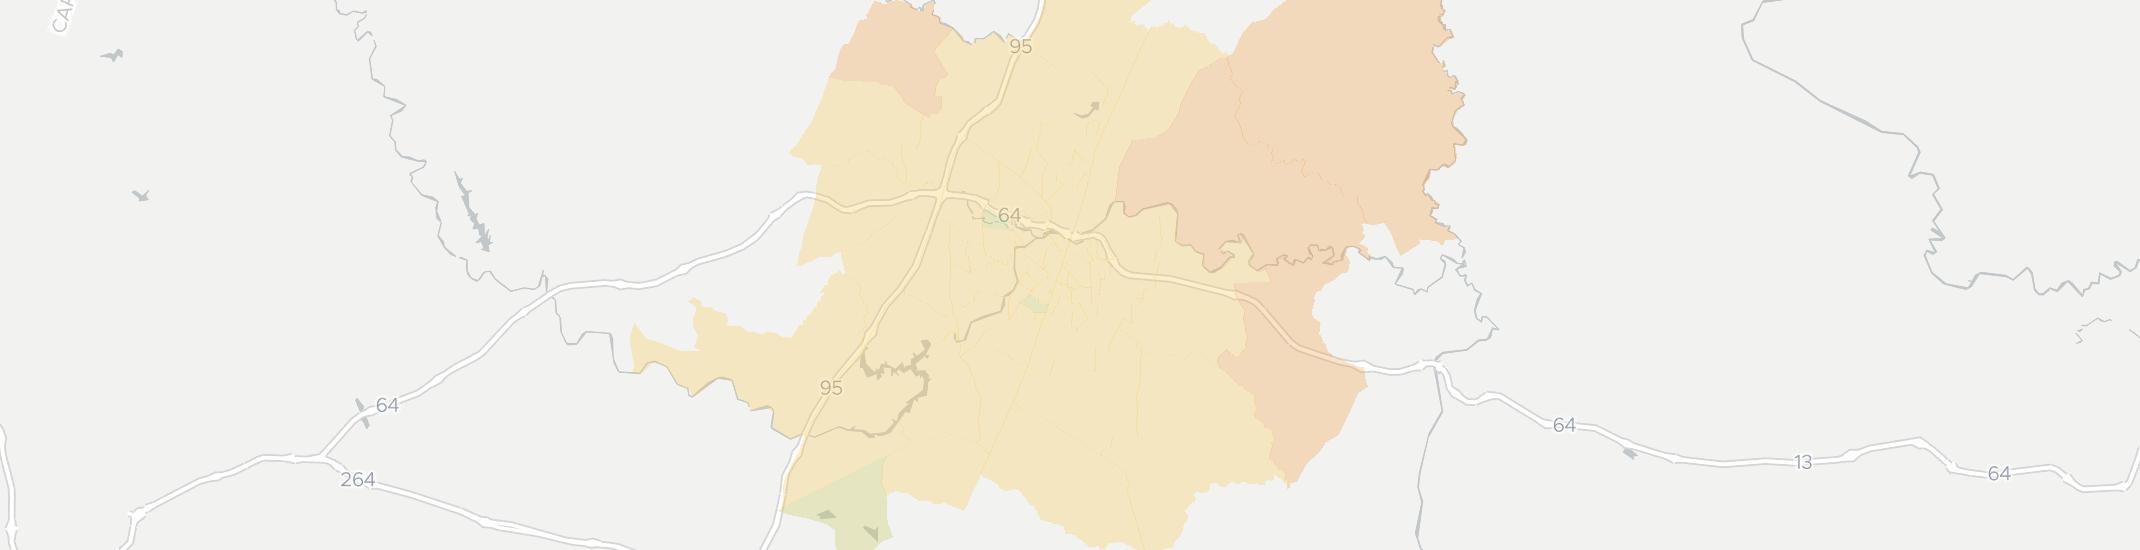 Rocky Mount Internet Competition Map. Click for interactive map